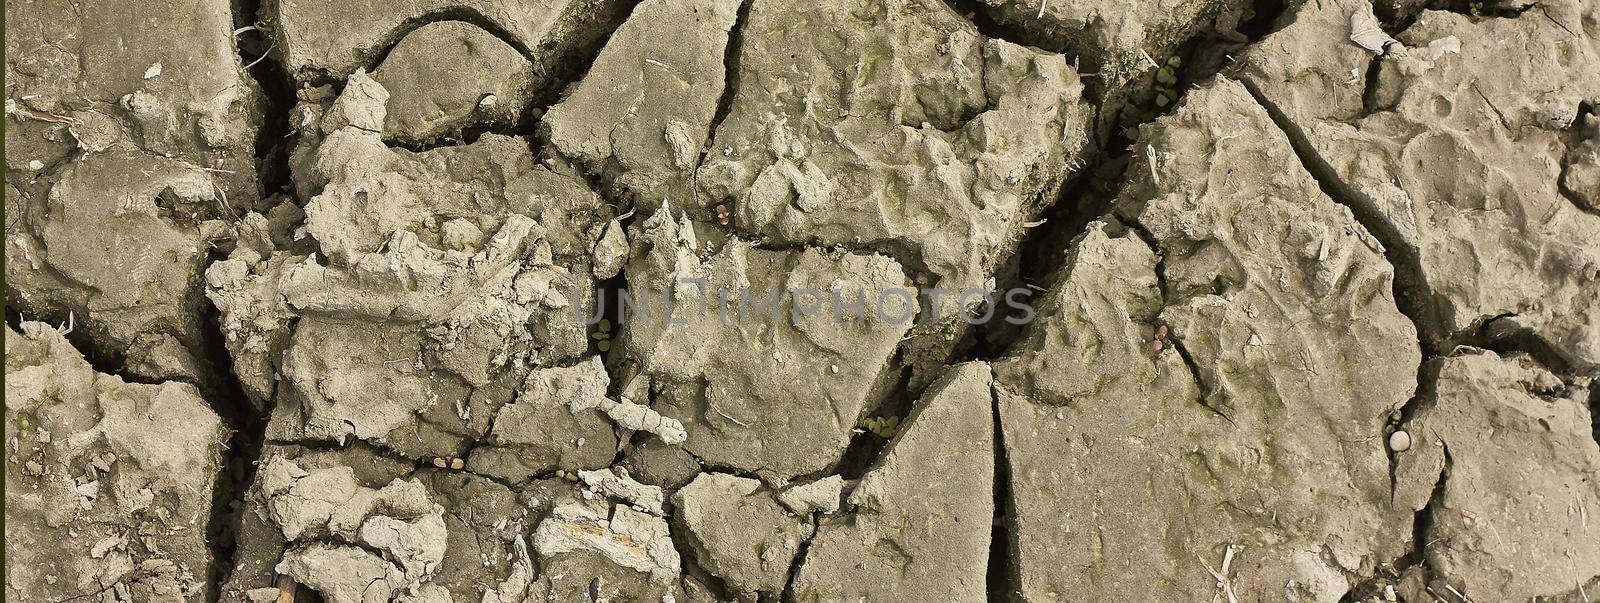 Cracks in the earth, banner image with copy space